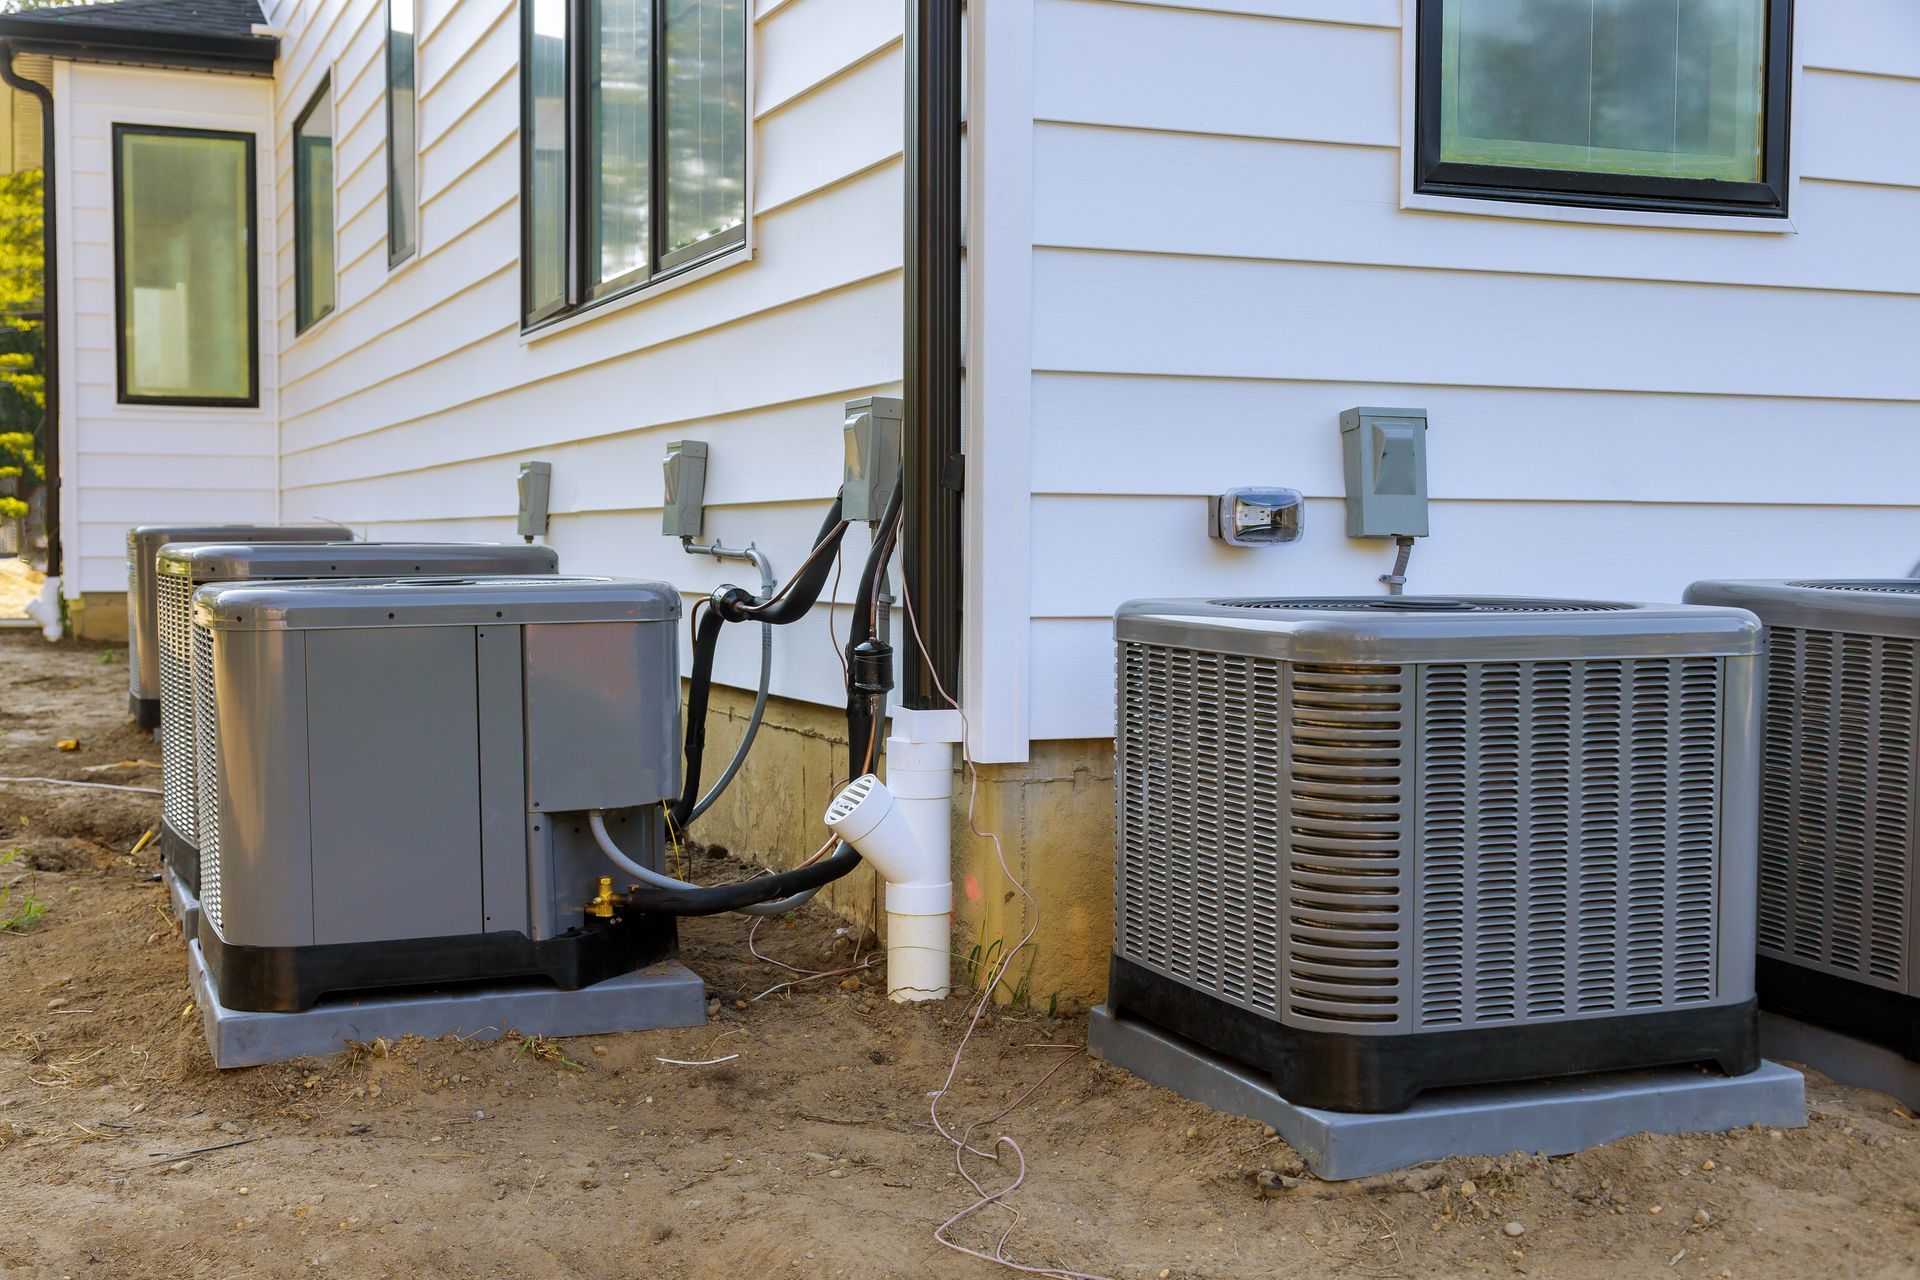 An air conditioning system being installed in a newly constructed house.